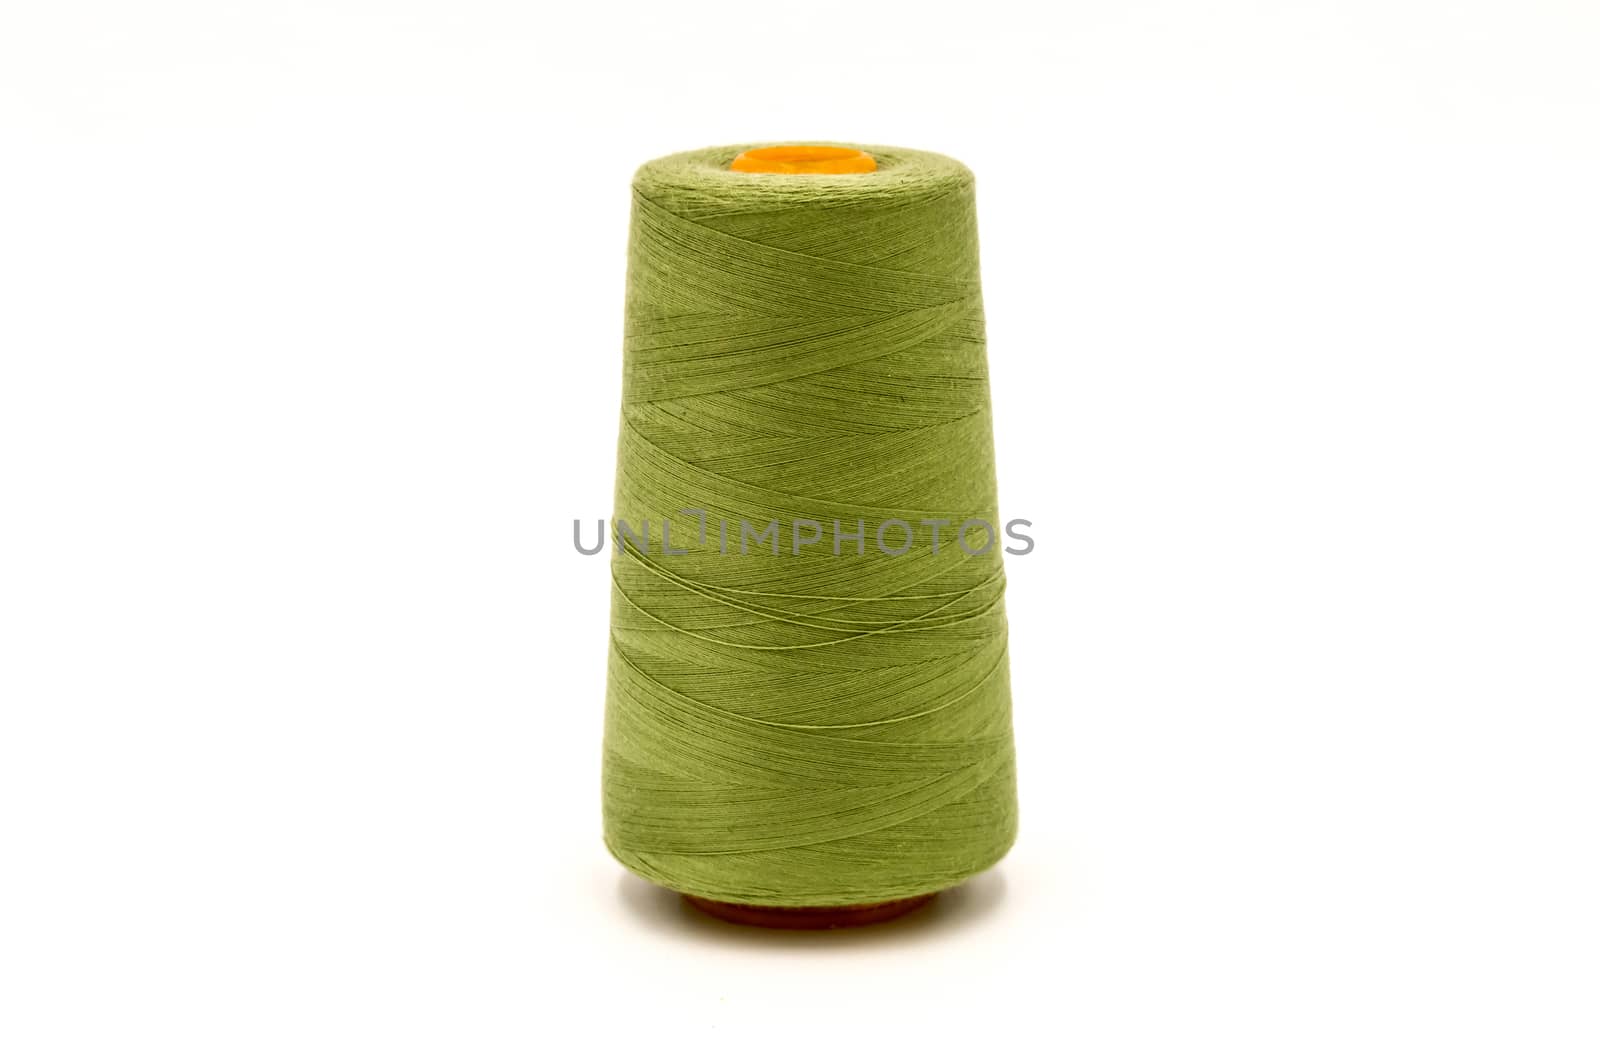 Close up of spool of colored thread  by Philou1000